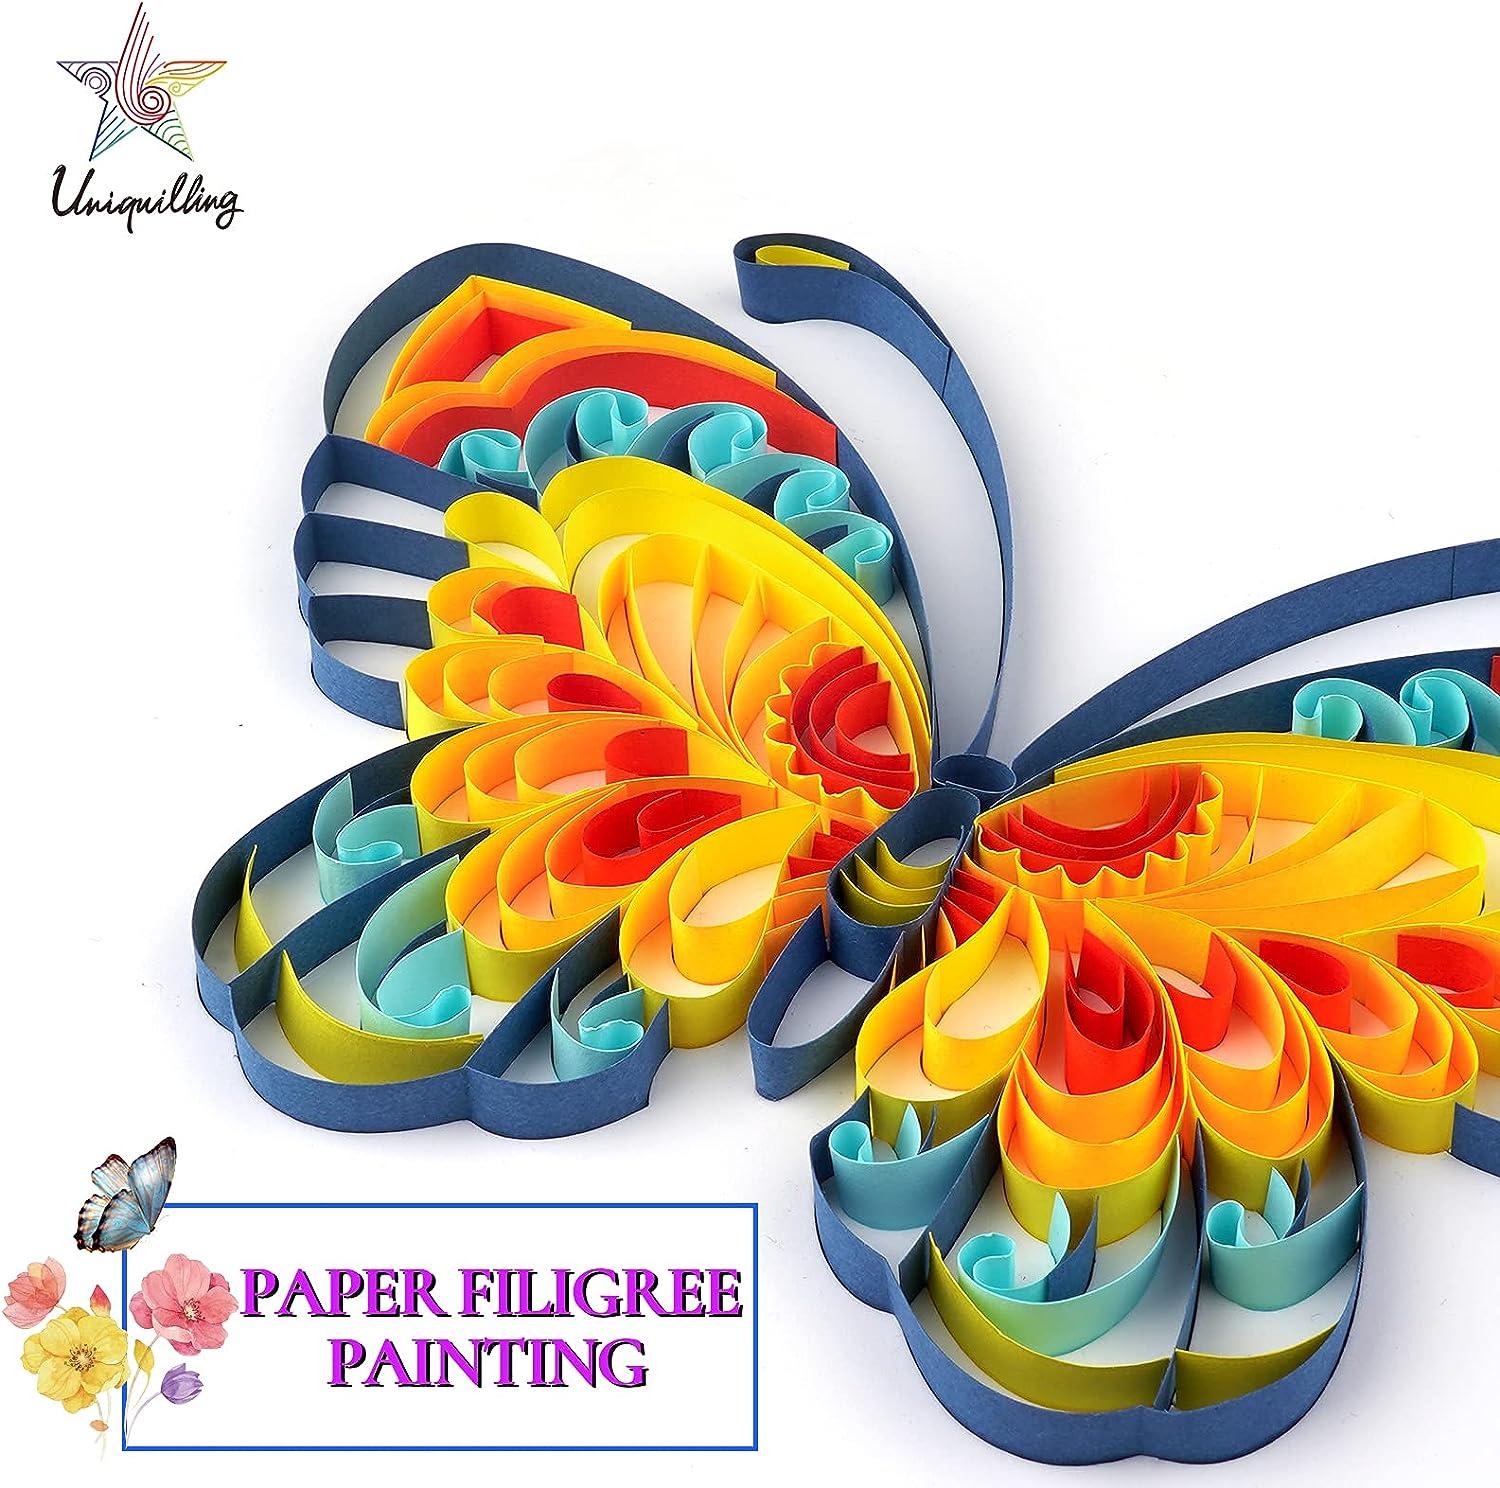 Uniquilling Quilling Paper Quilling Kit for Adults Beginner - 8